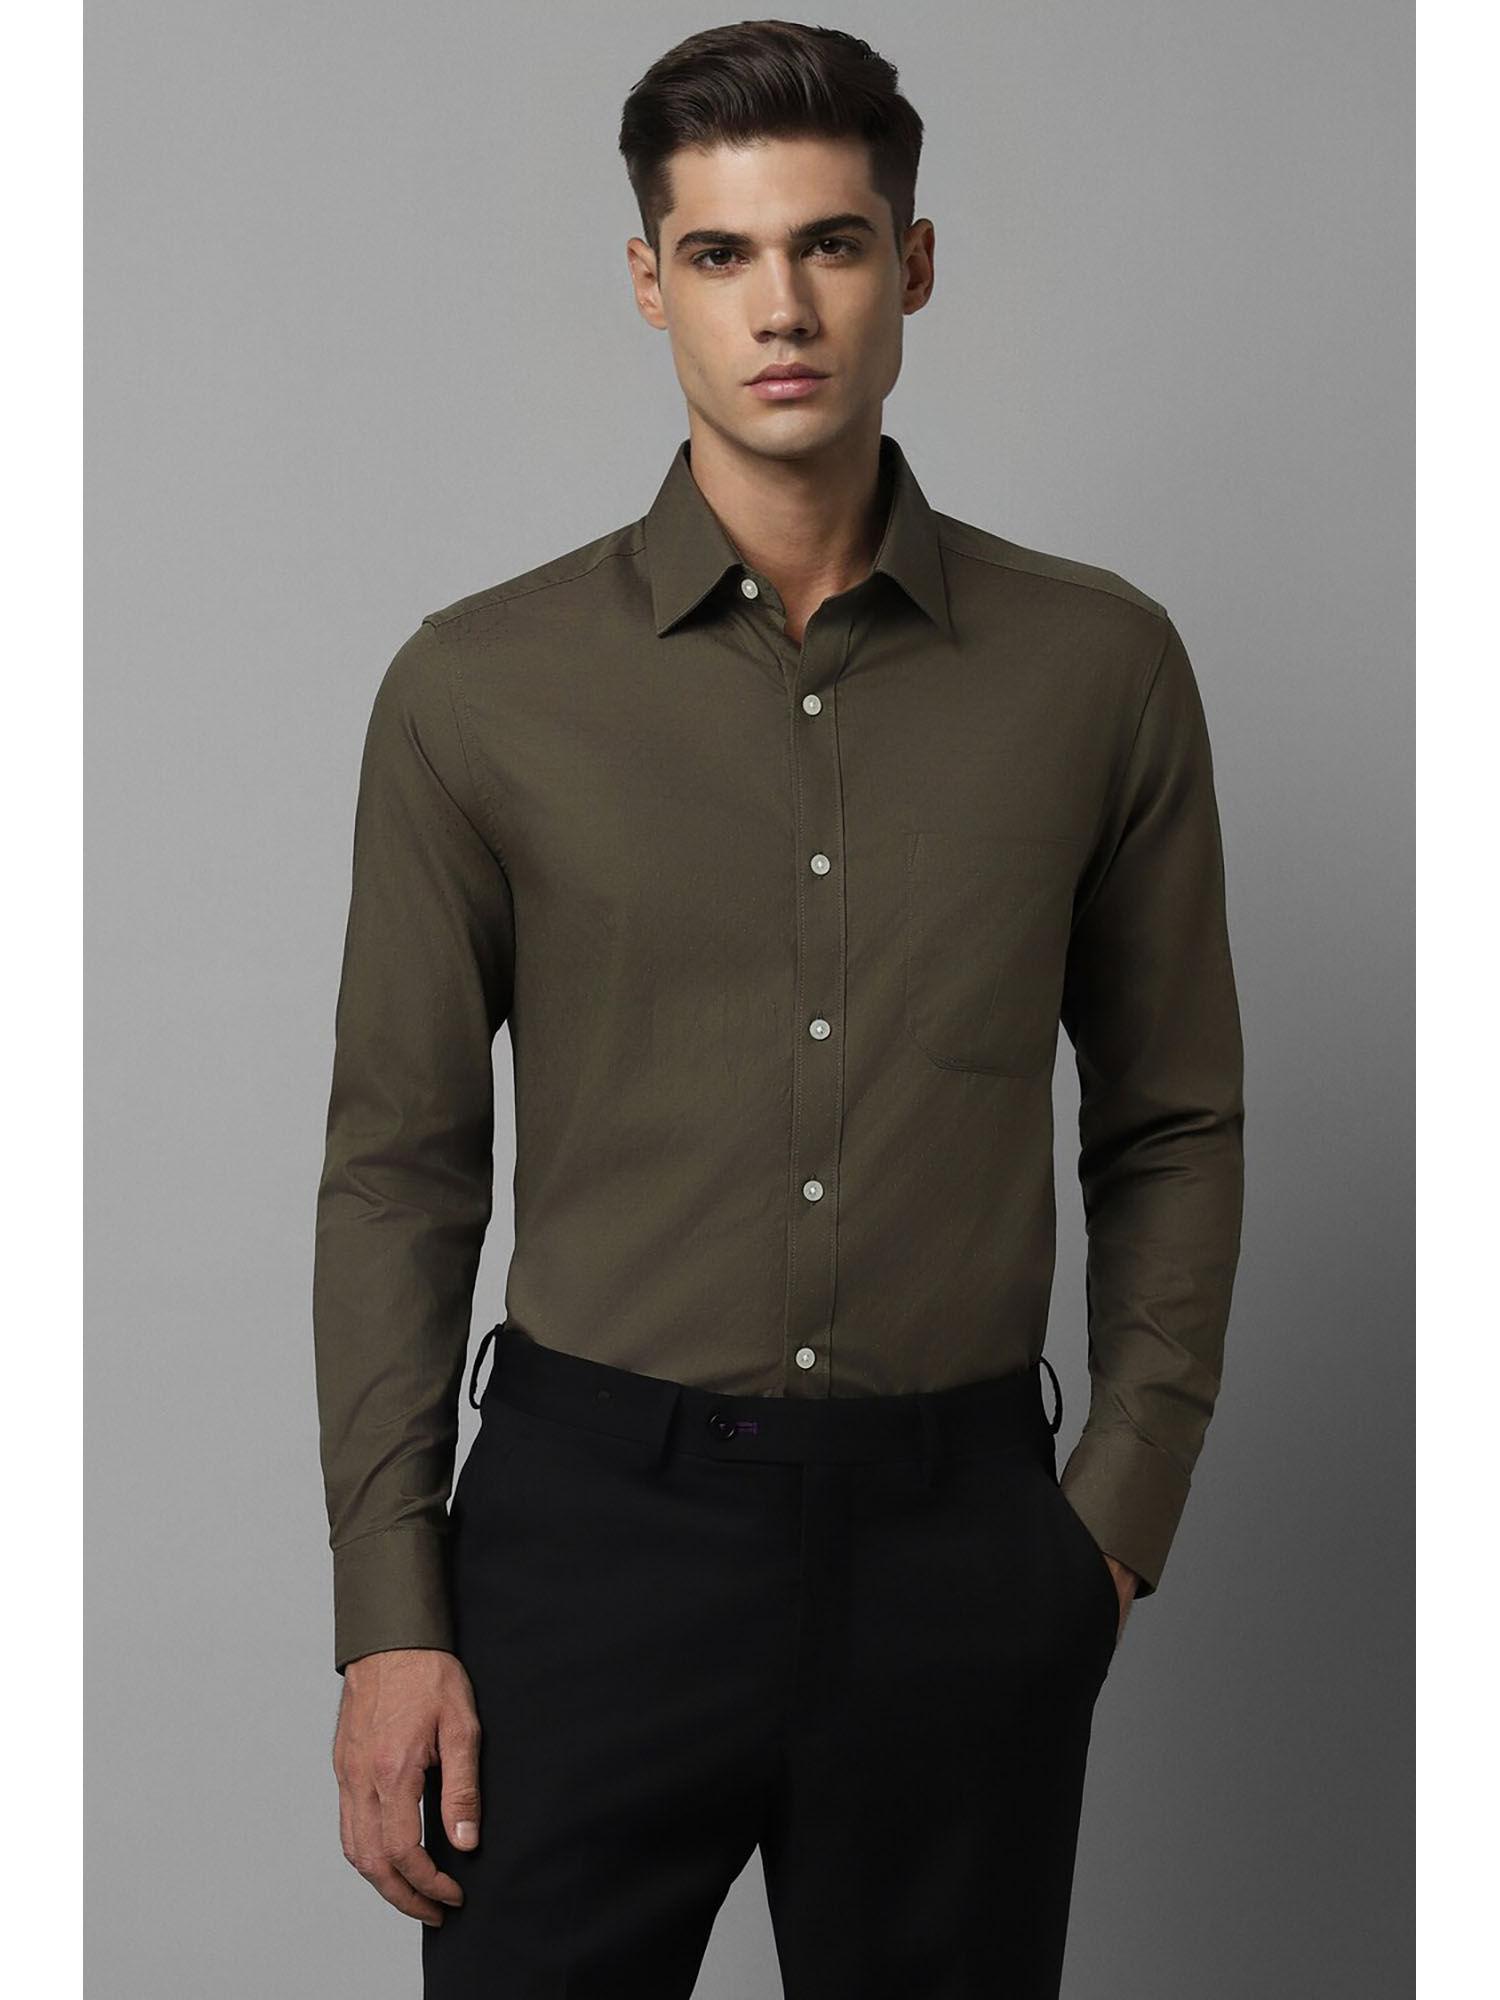 mens olive classic fit textured full sleeves formal shirt